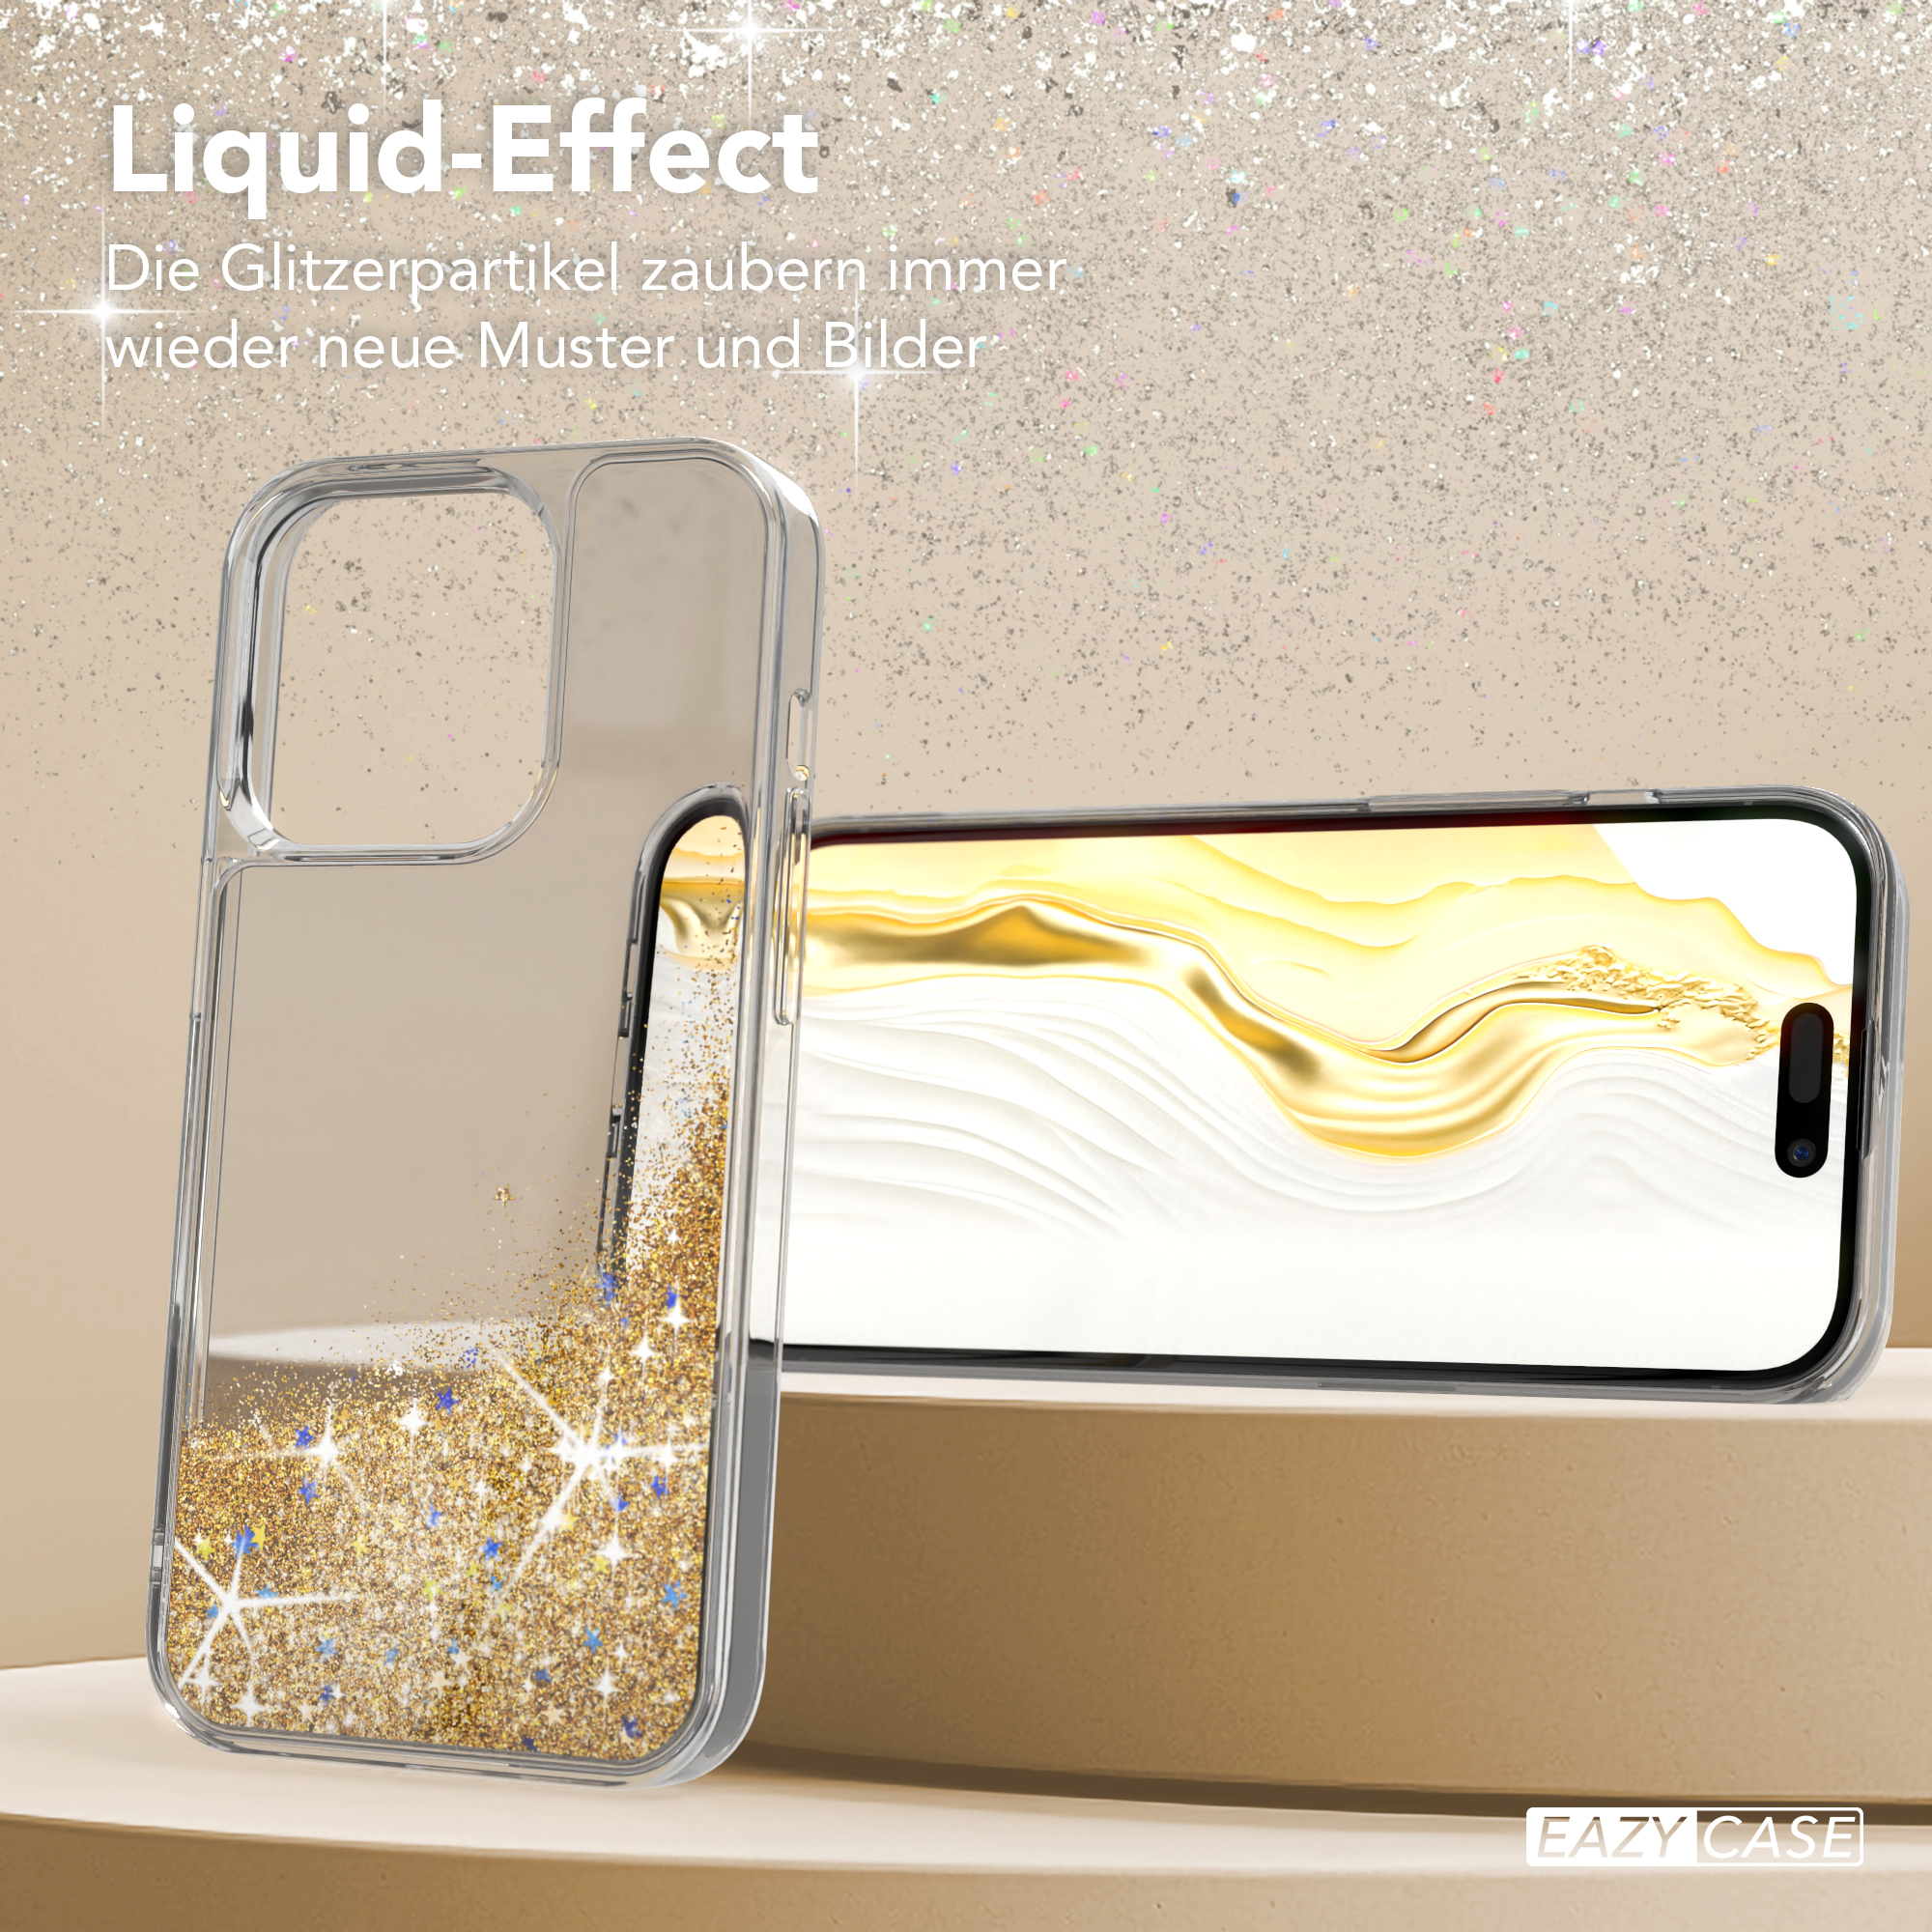 Gold Apple, Case, iPhone Glittery Liquid Pro, EAZY Backcover, CASE 15